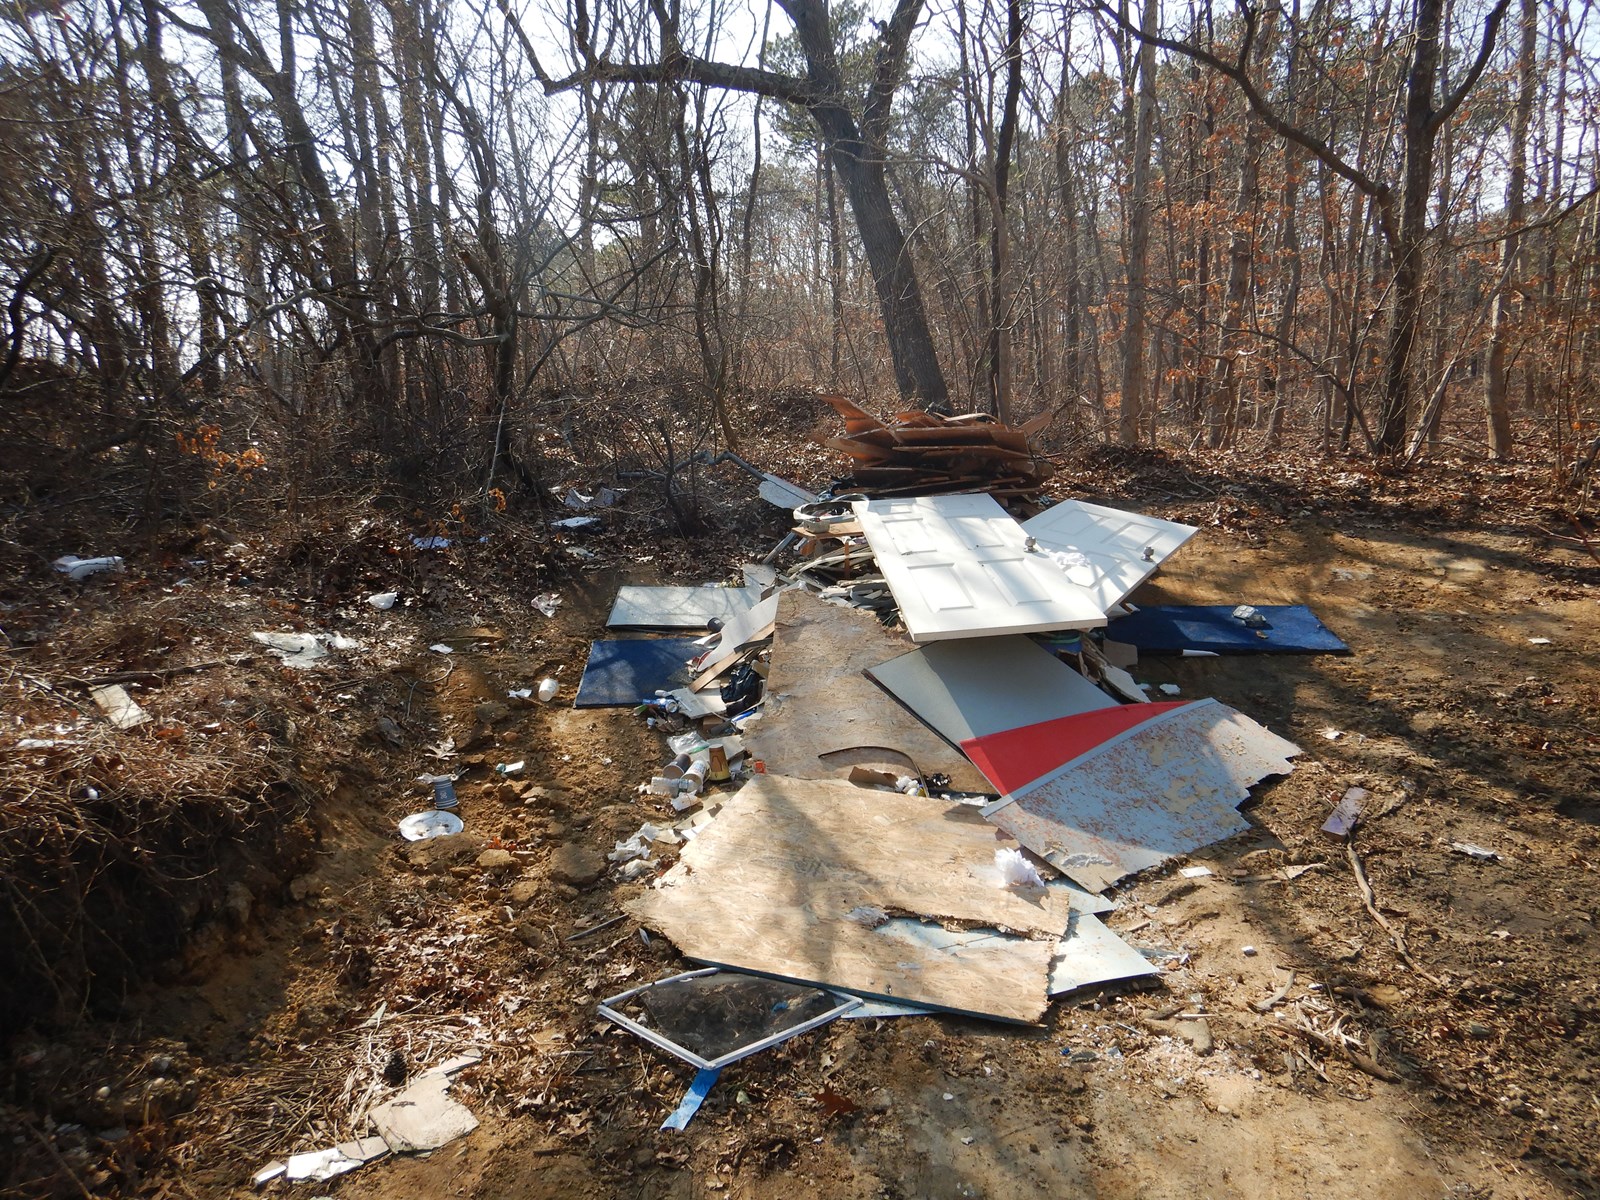 Illegal dumping of construction debris in the Central Pine Barrens